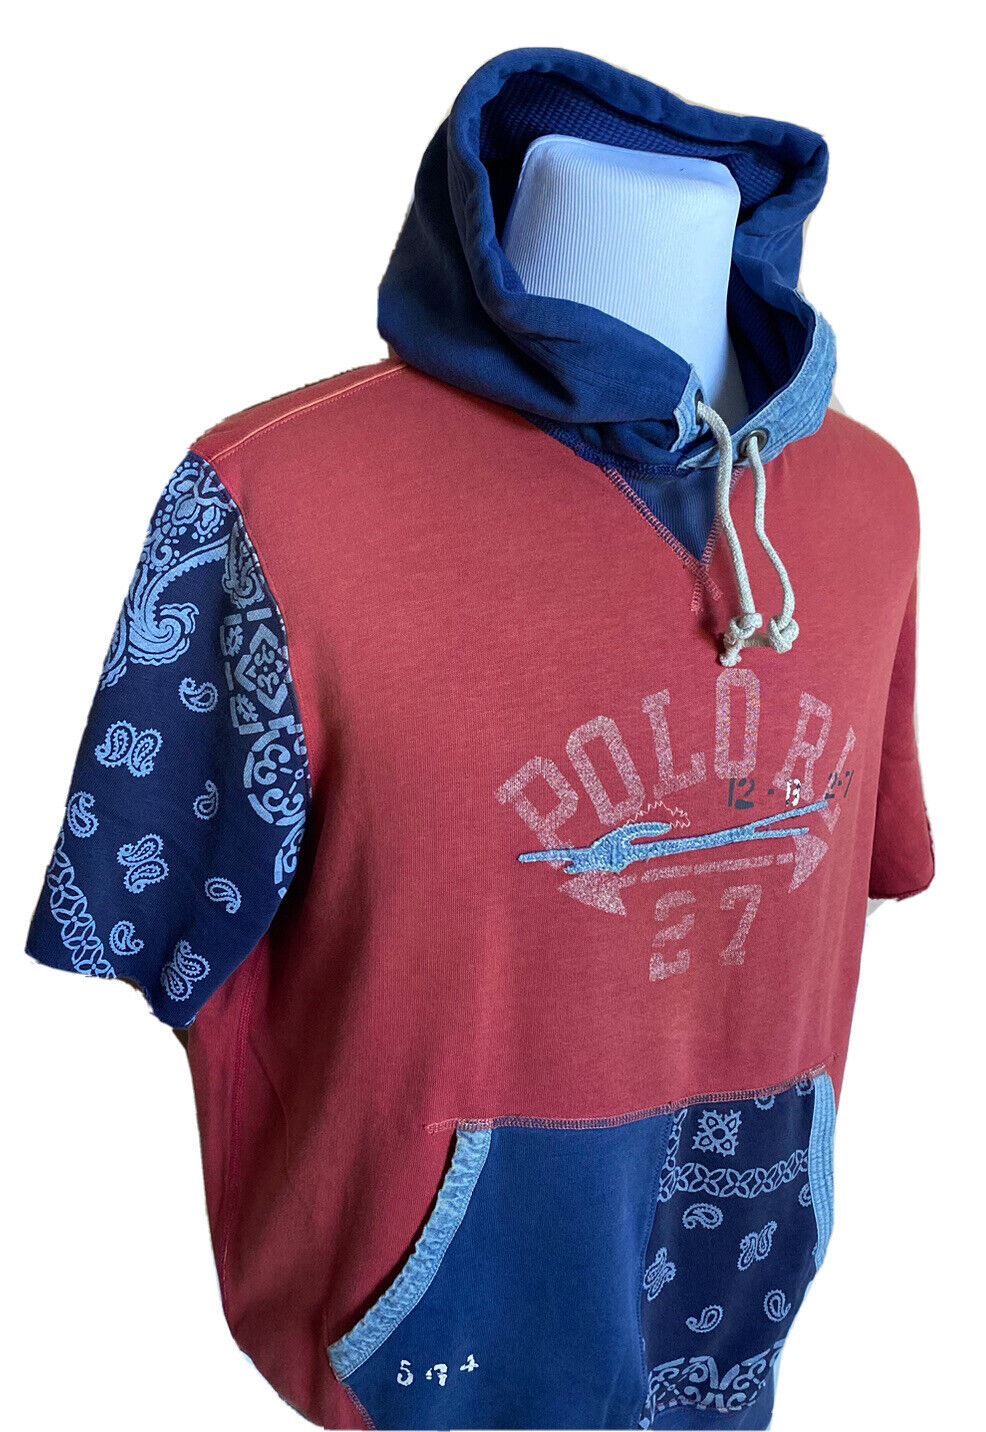 New $188 Polo Ralph Lauren Logo Short Sleeve T-Shirt with Hoodie Large